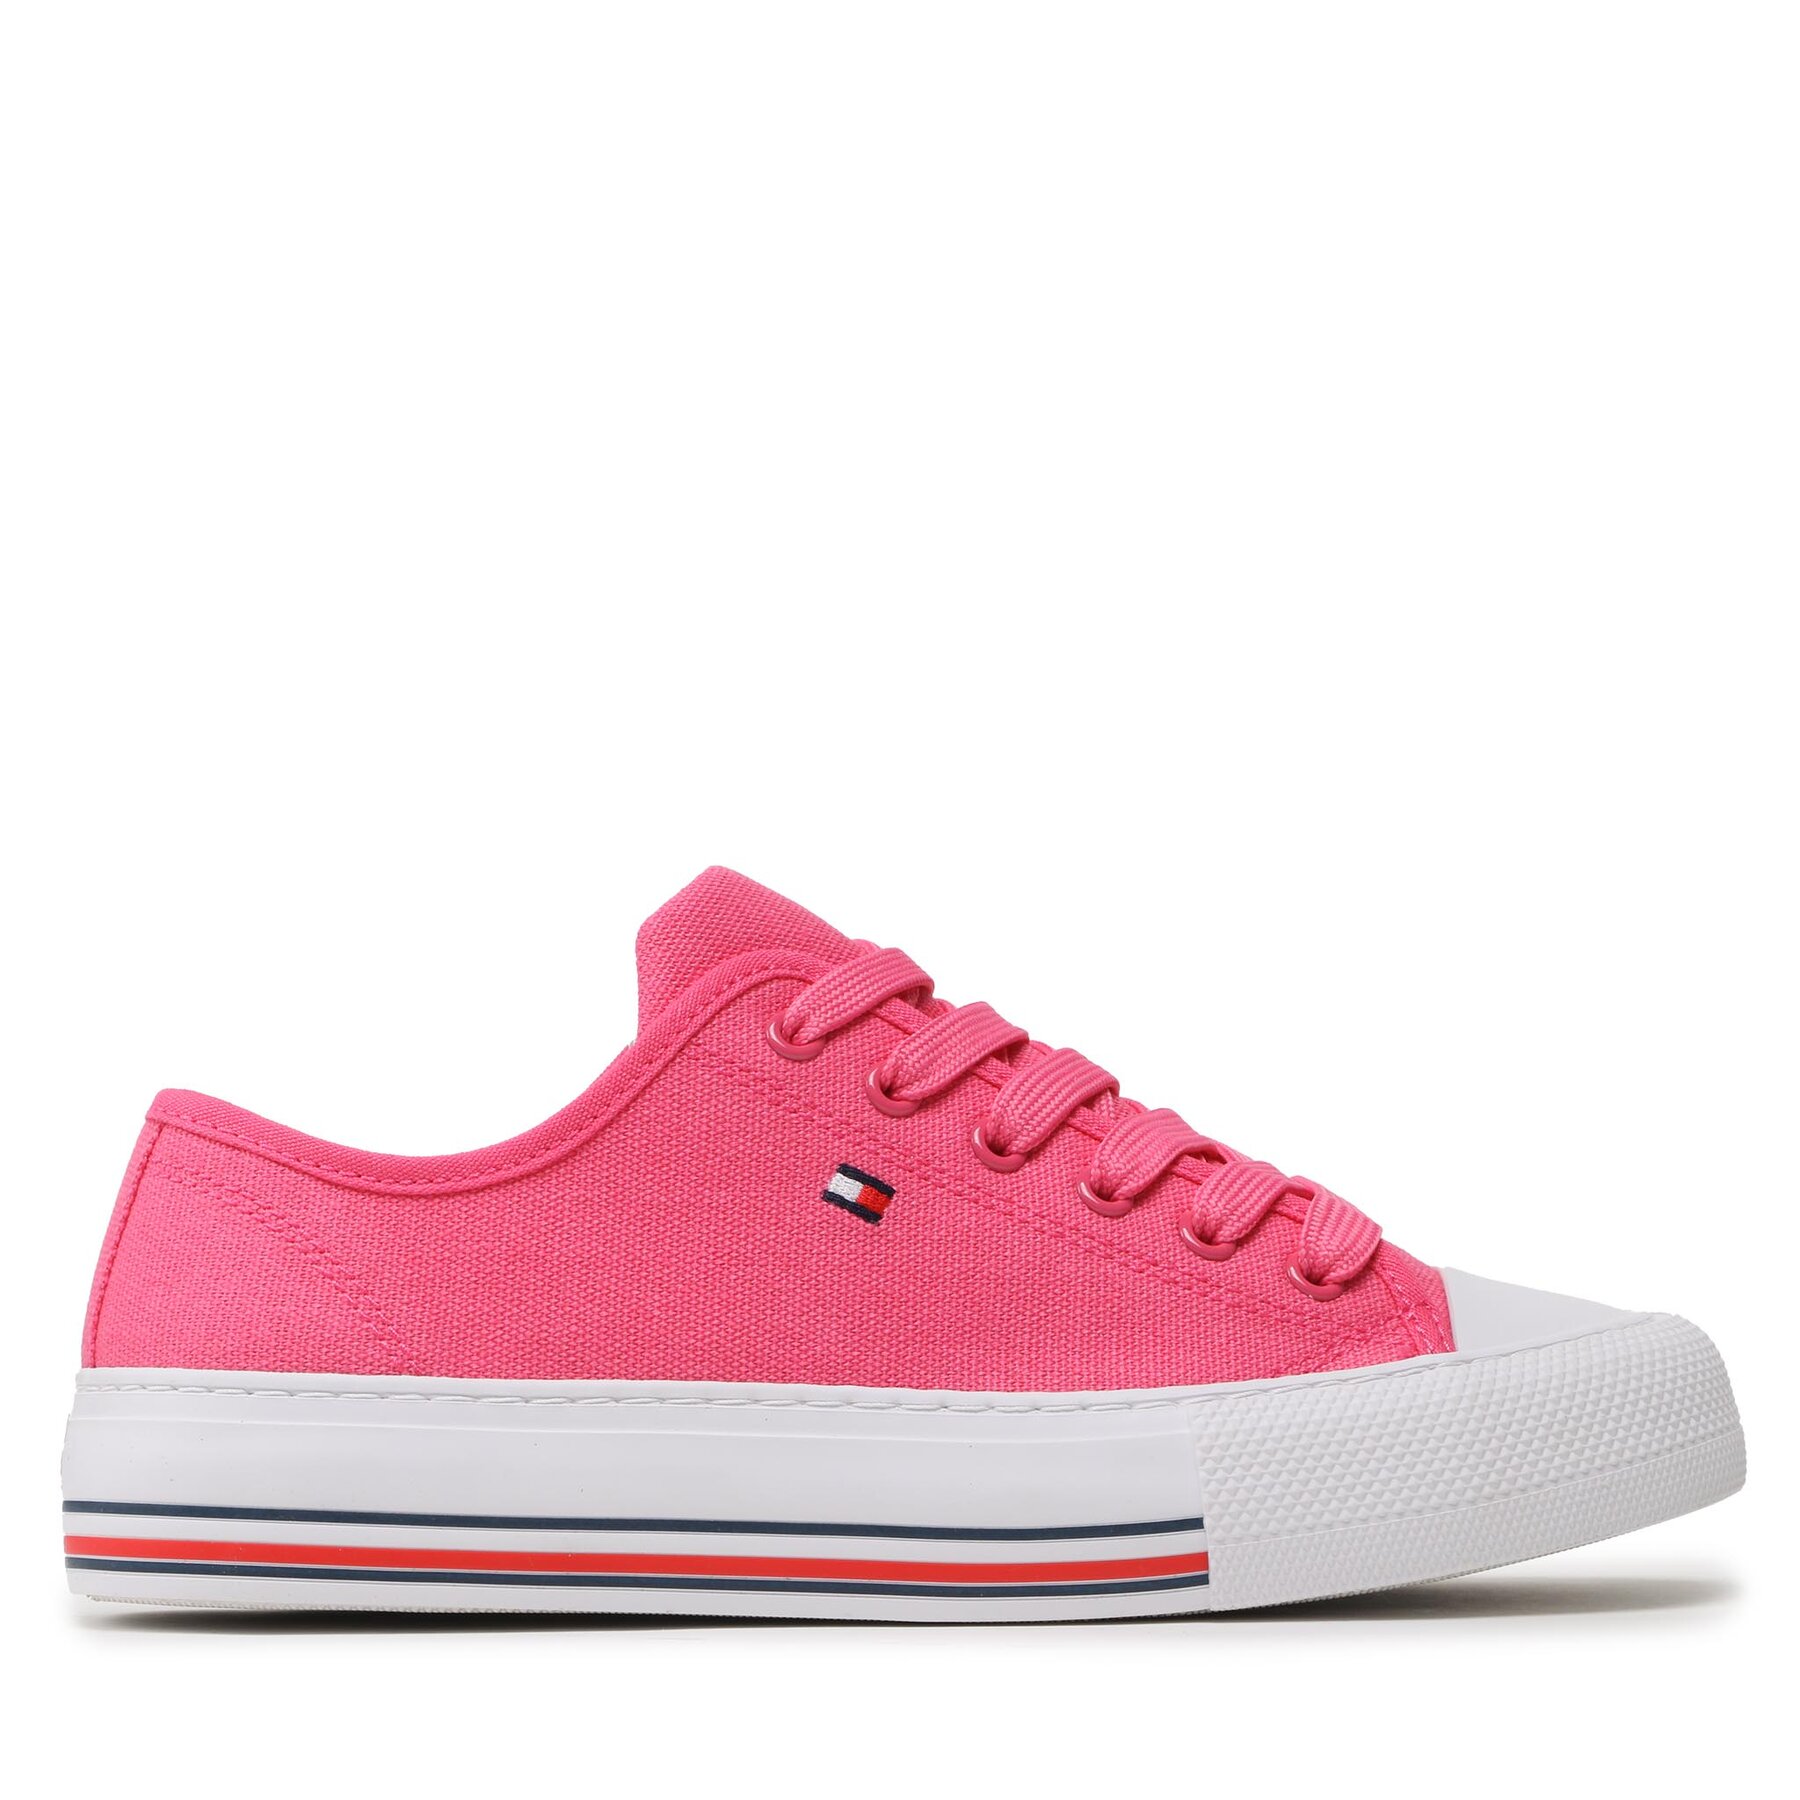 Sneakers aus Stoff Tommy Hilfiger Low Cut Lace-Up T3A9-32677-0890313 S Fuchsia 313 von Tommy Hilfiger